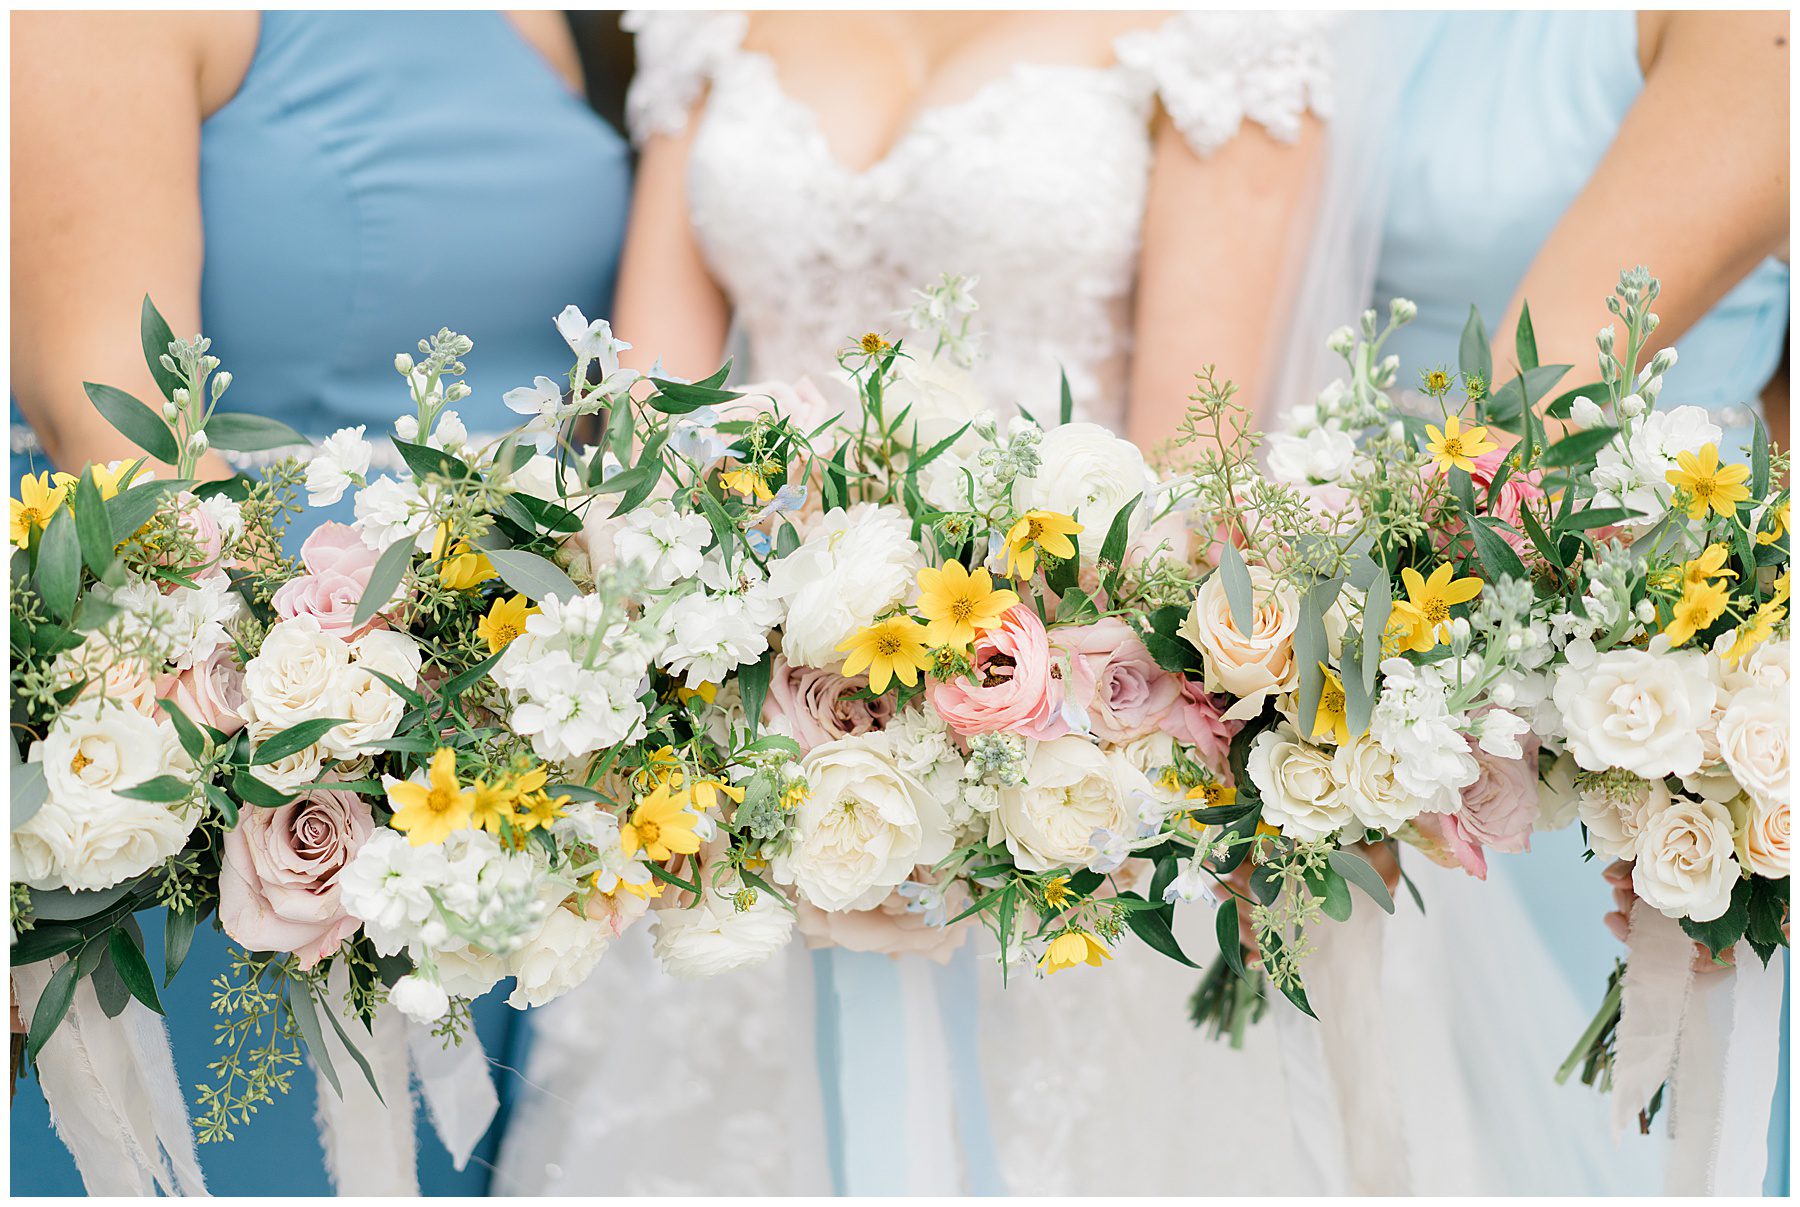 classic wedding bouquet with pops of yellow flowers